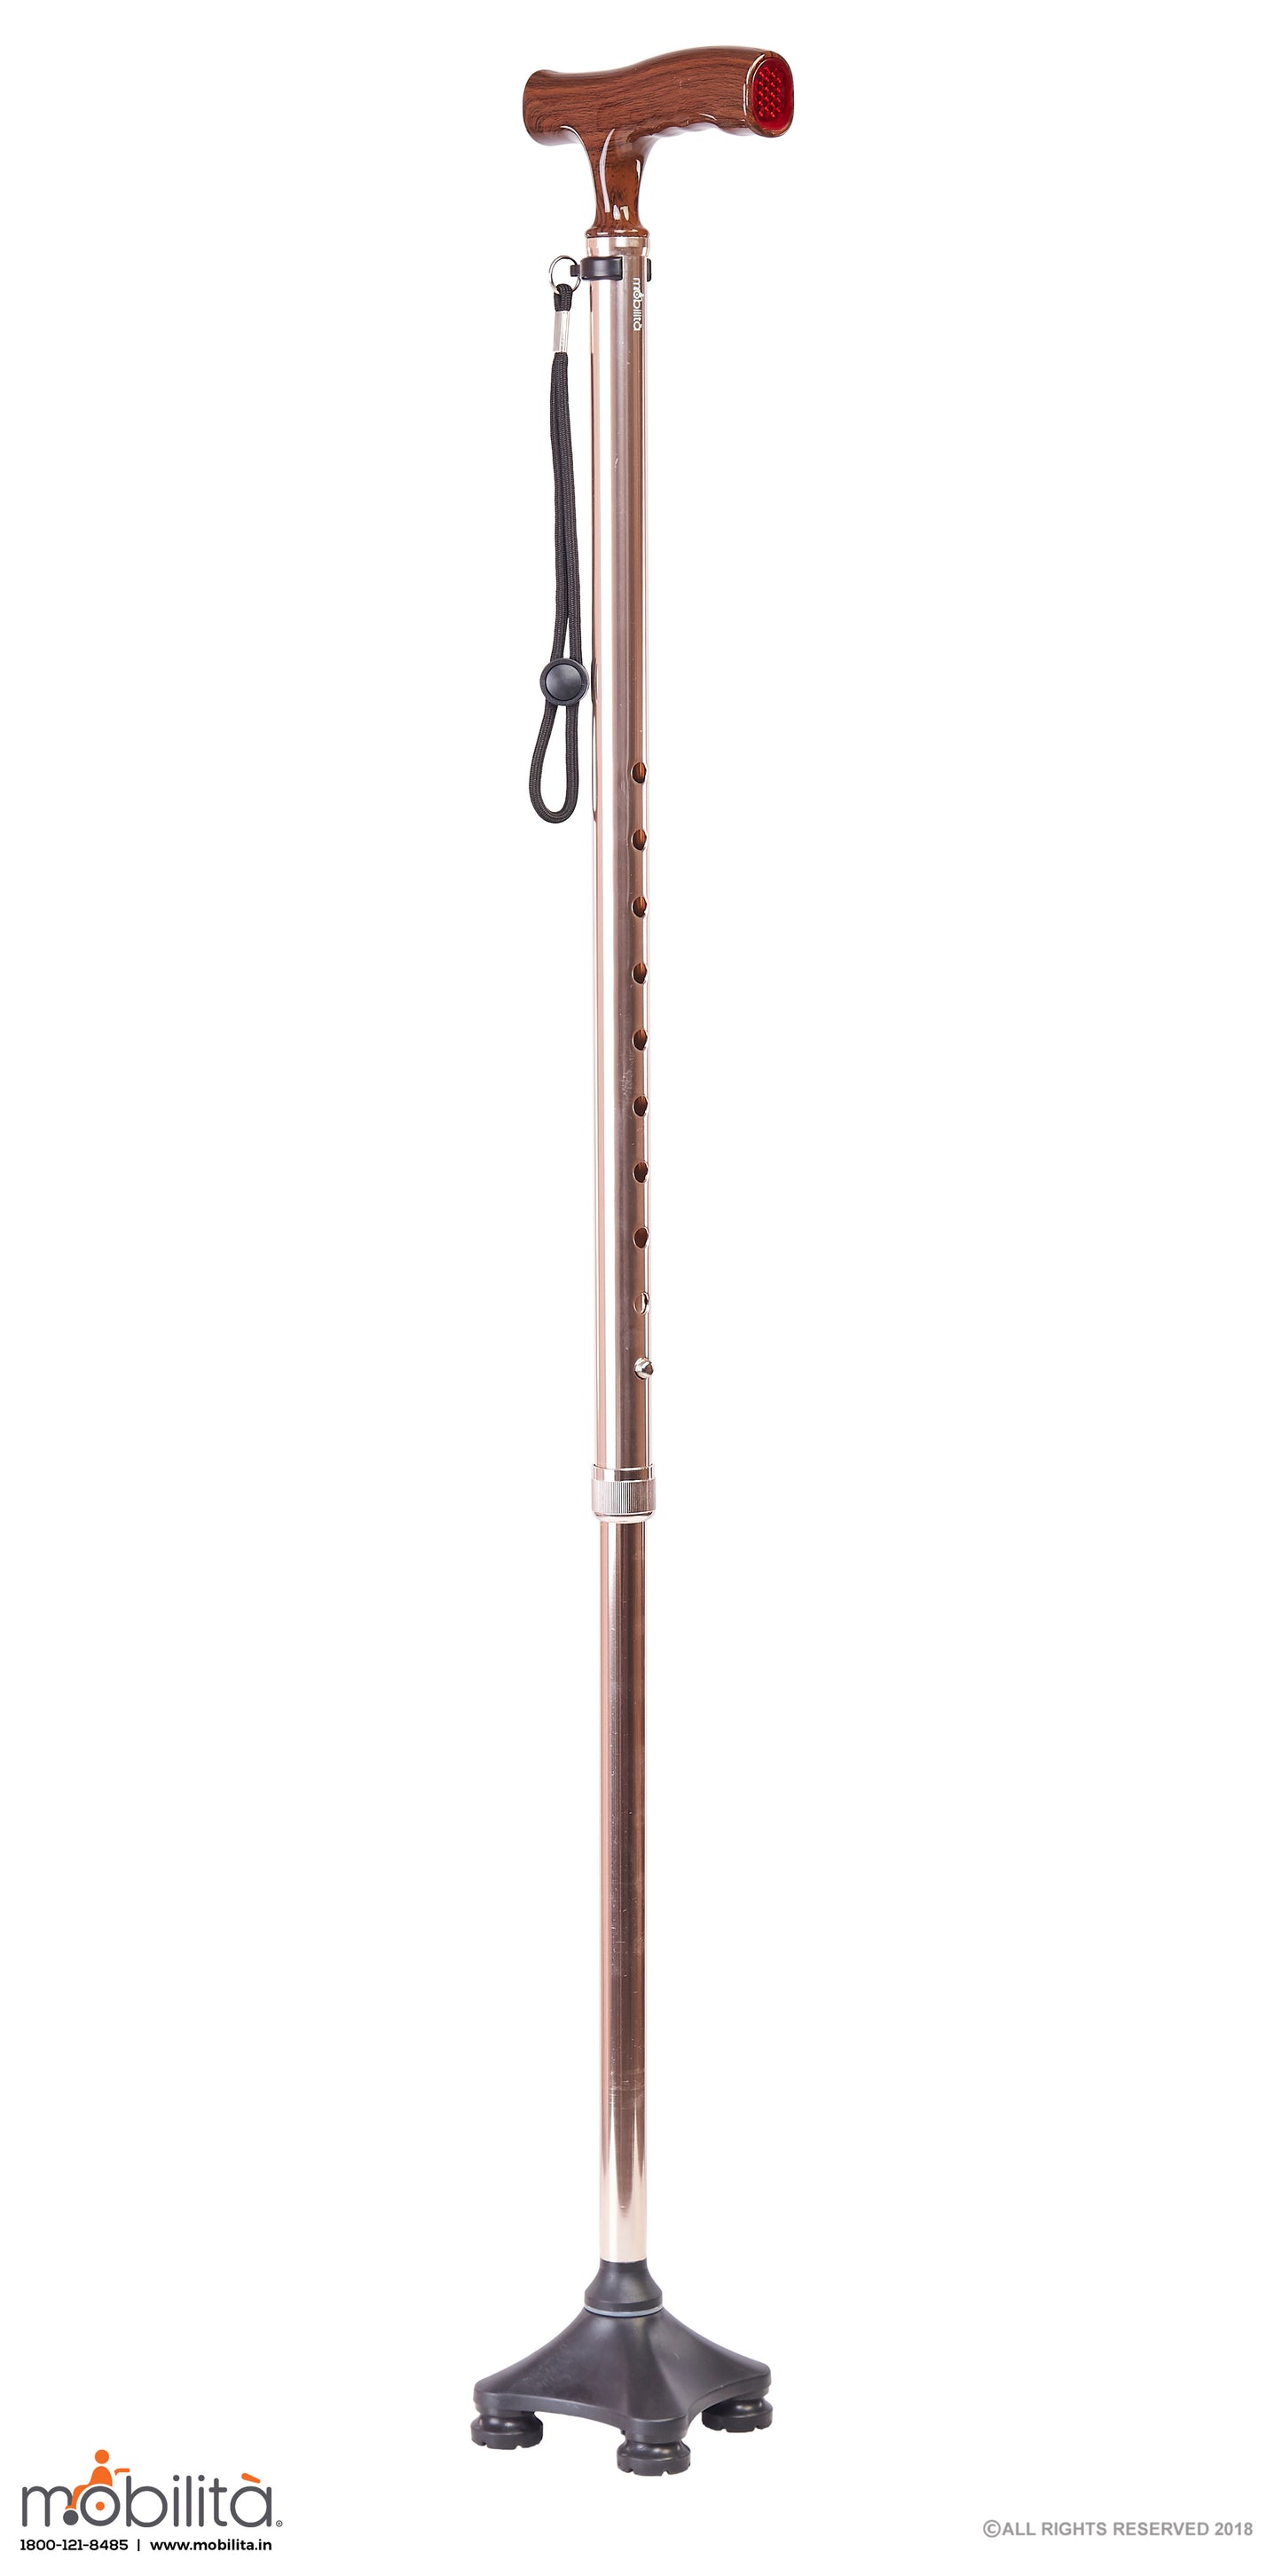 M 708 - Walking Cane - Square Foot - Straight Shank - Champagne Gold